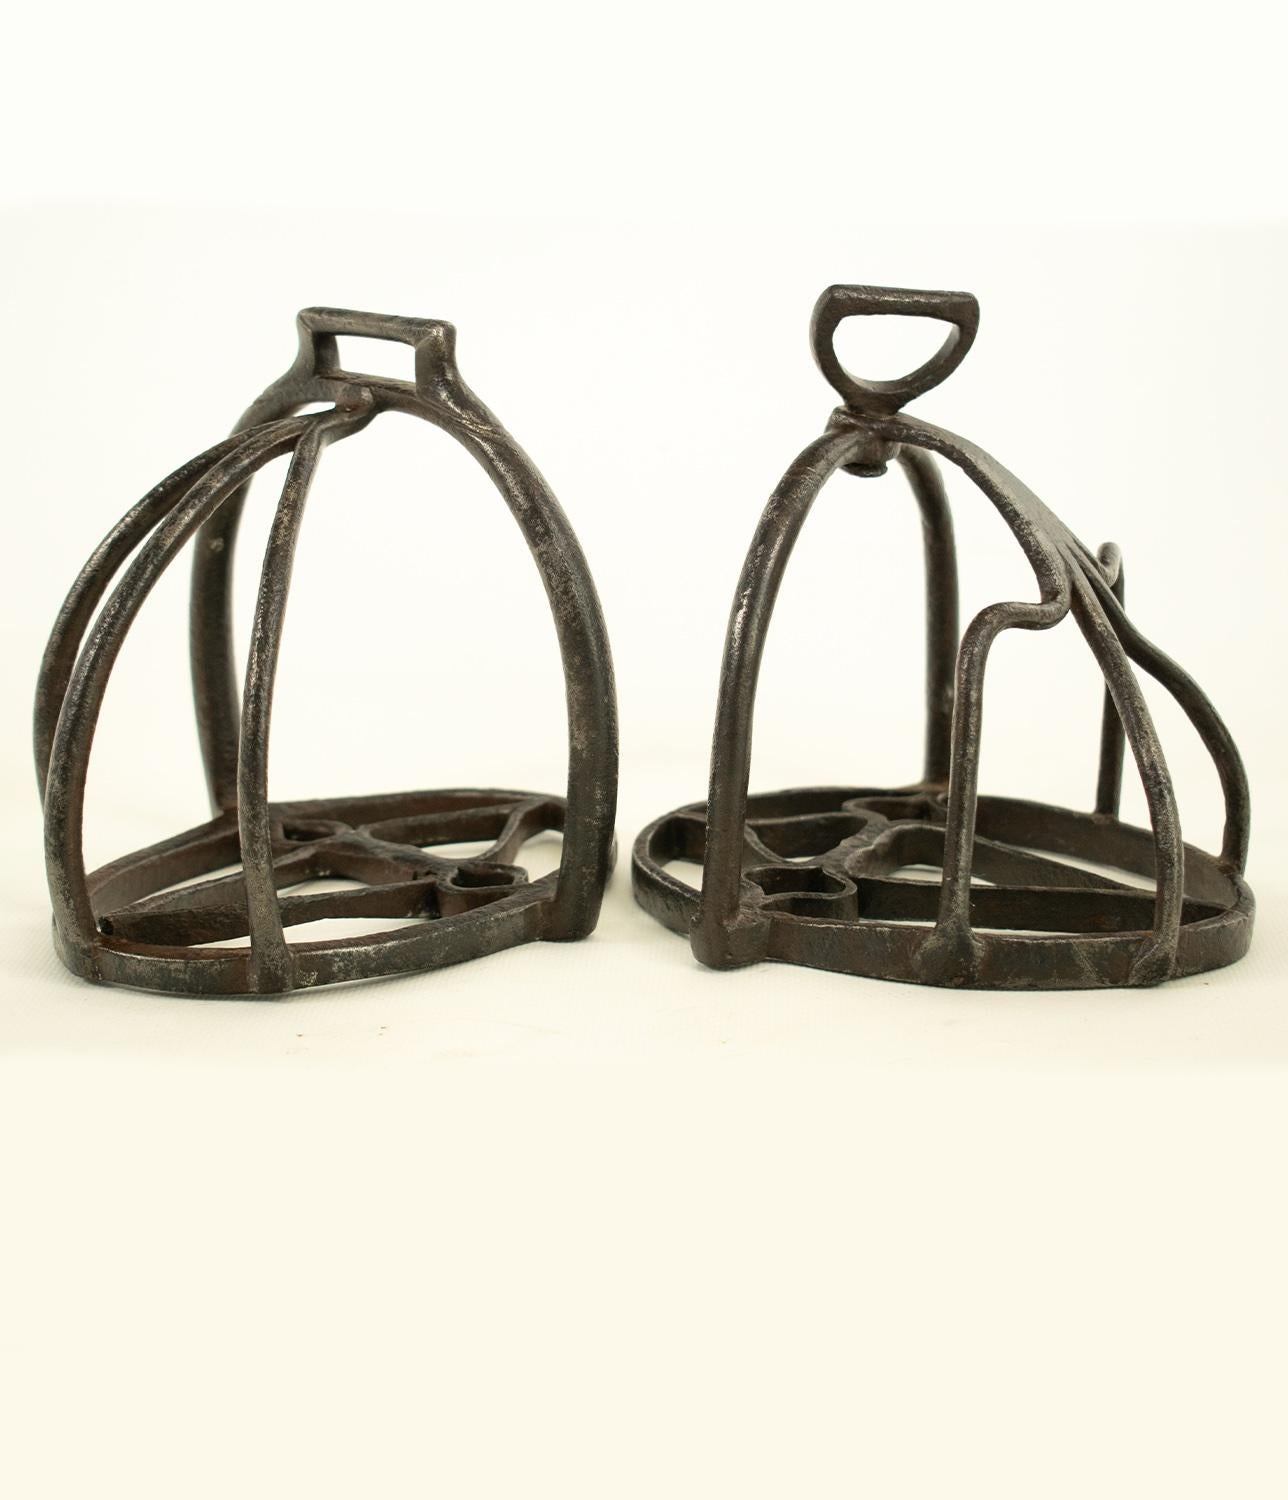 Forged Composed pair of original mid 17th/early 18th century Cavalry basket Stirrups For Sale